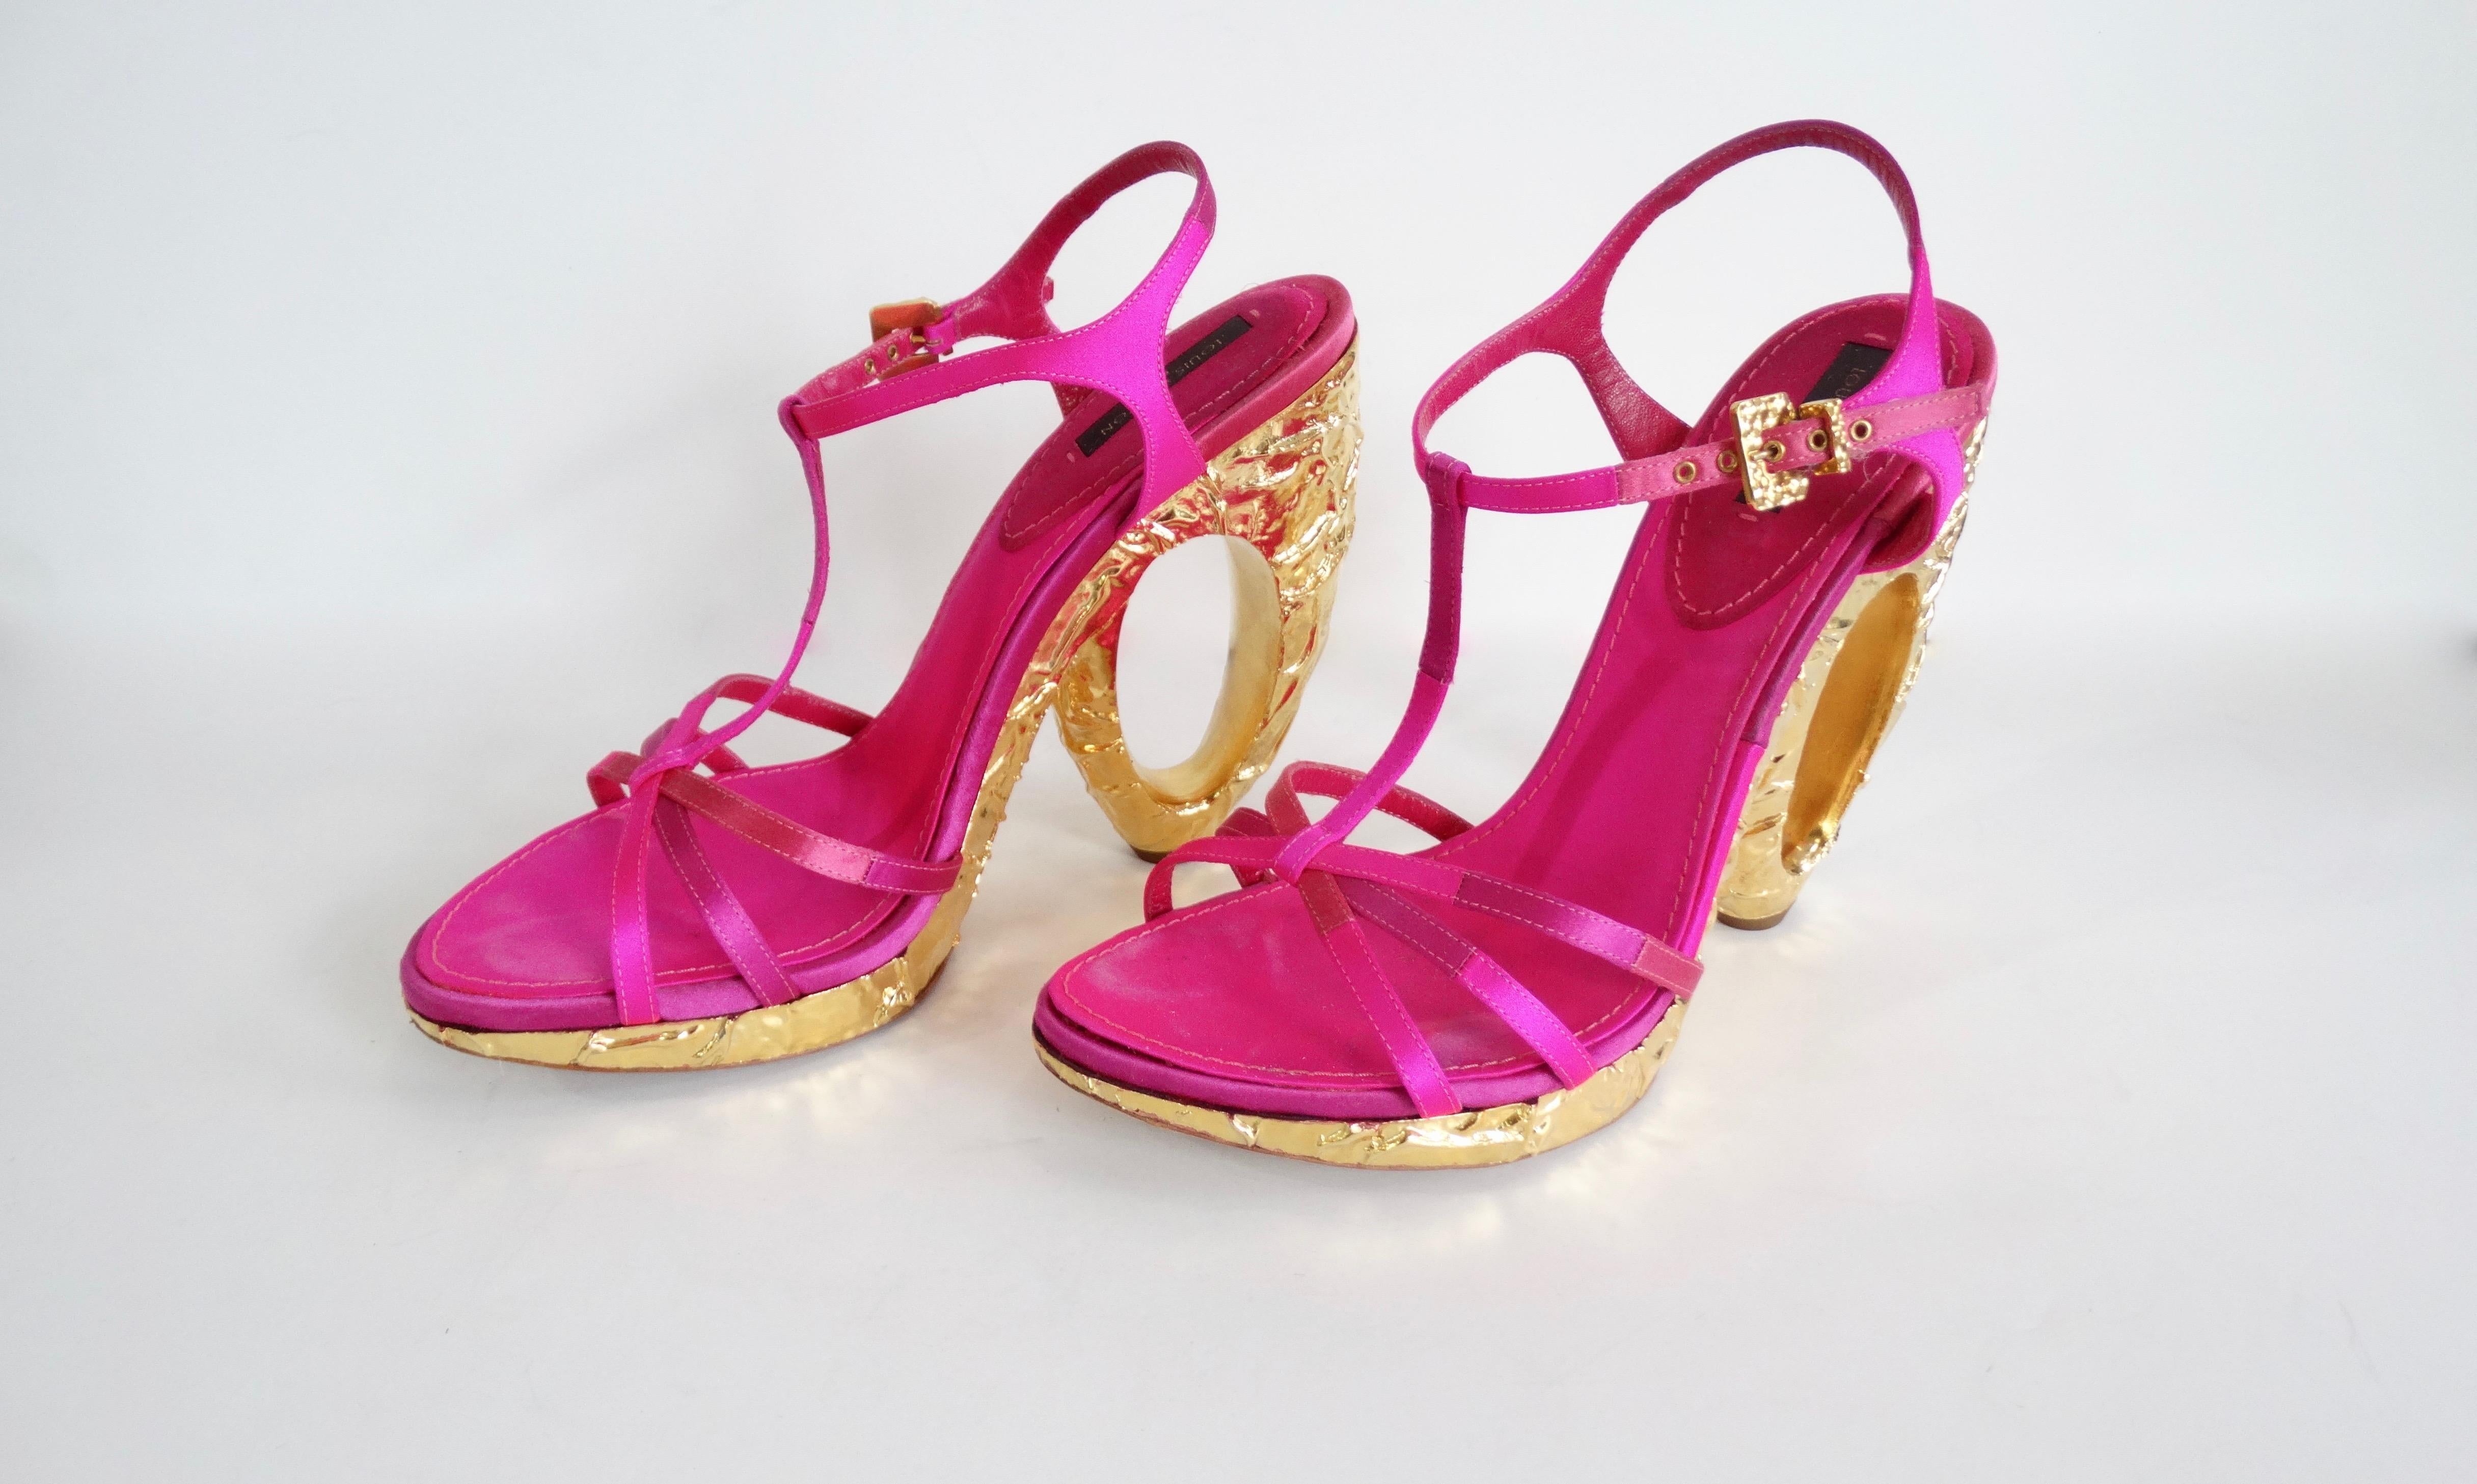 Red Louis Vuitton 2000s Fuchsia Satin Pumps With Textured Gold Heels For Sale